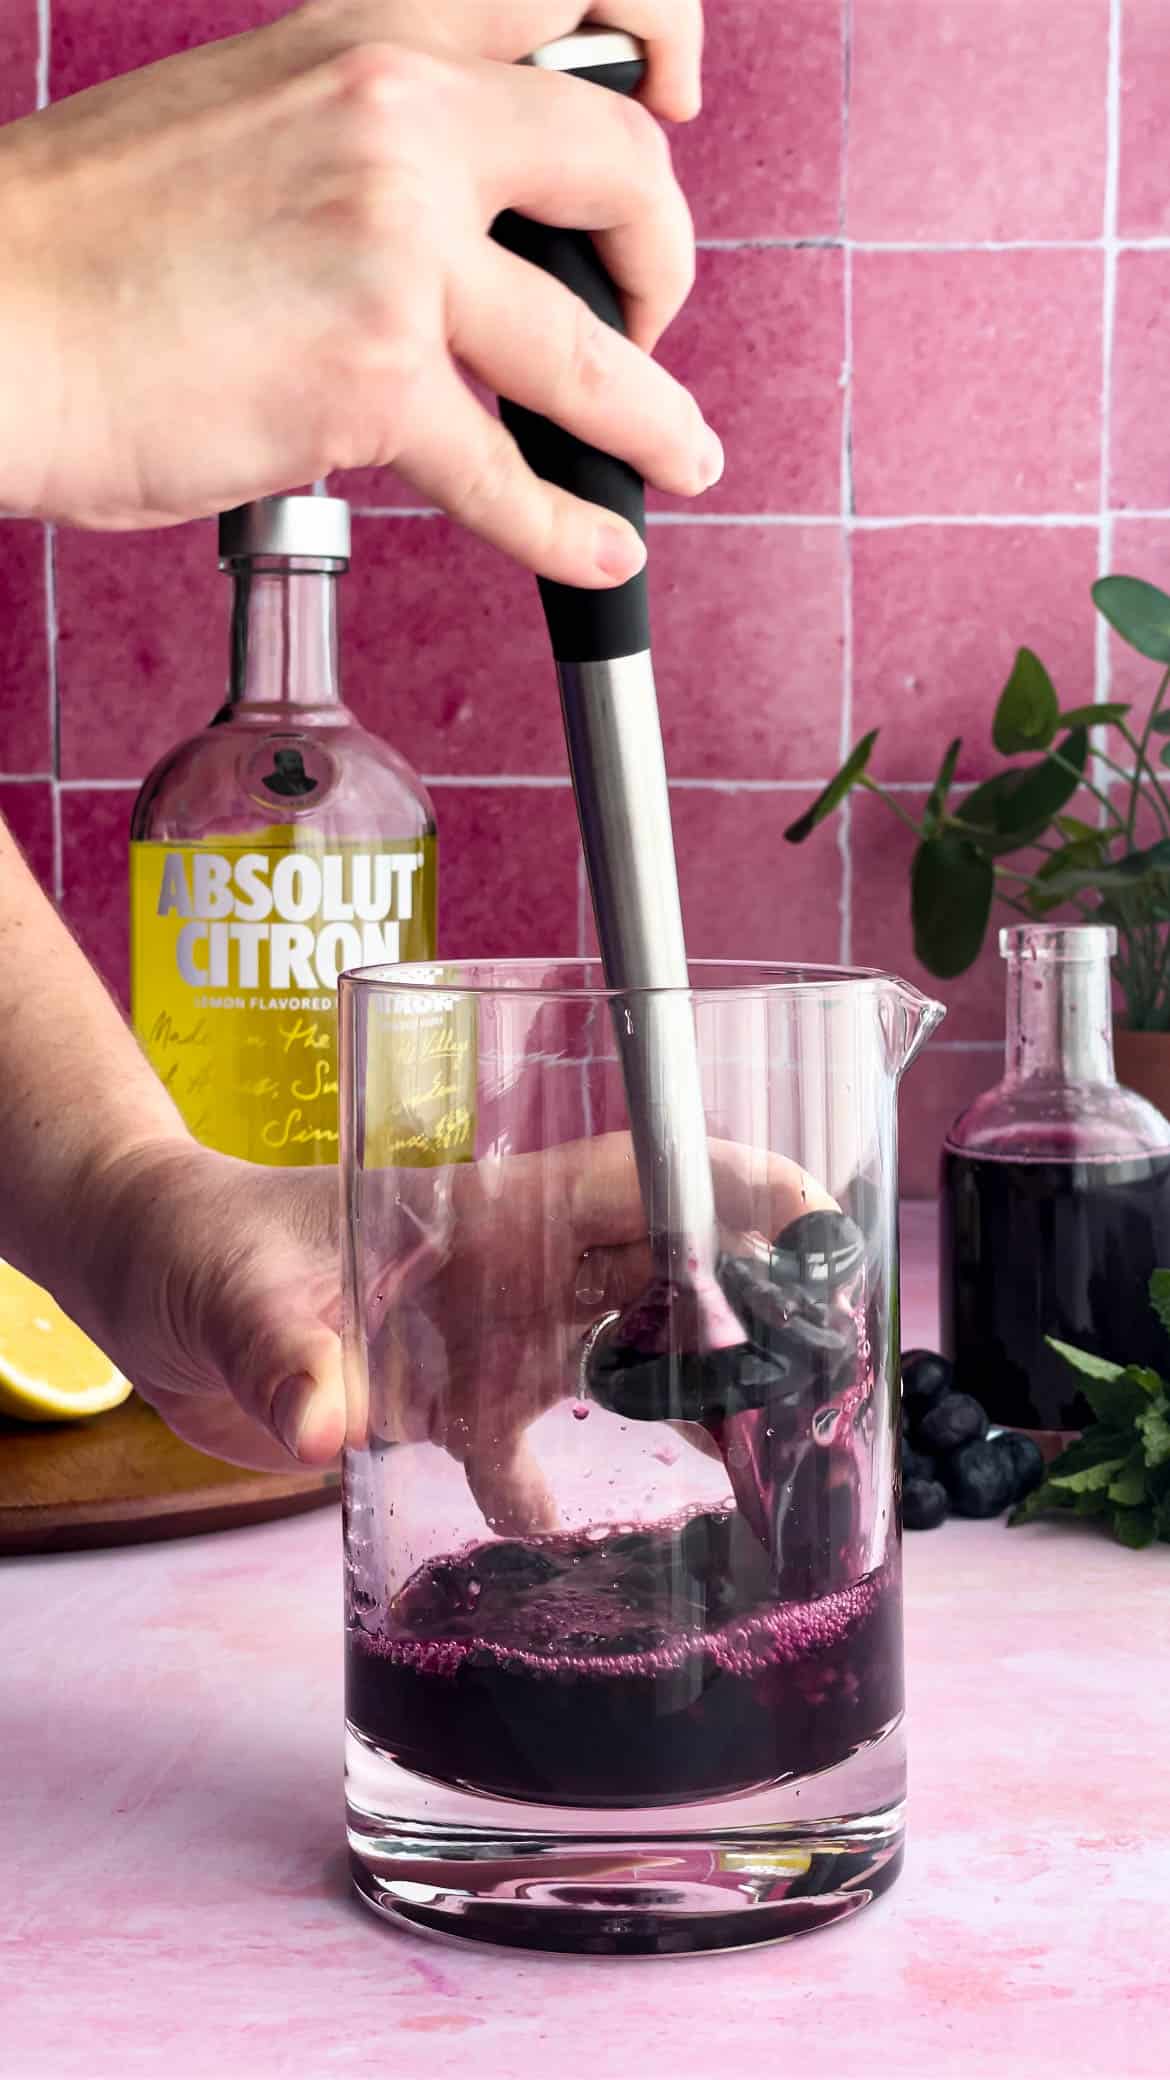 A person from out of frame is muddling blueberries, blueberry simple syrup, and lemon juice in a cocktail mixing glass while a bottle of Absolut Citron sits in the background.